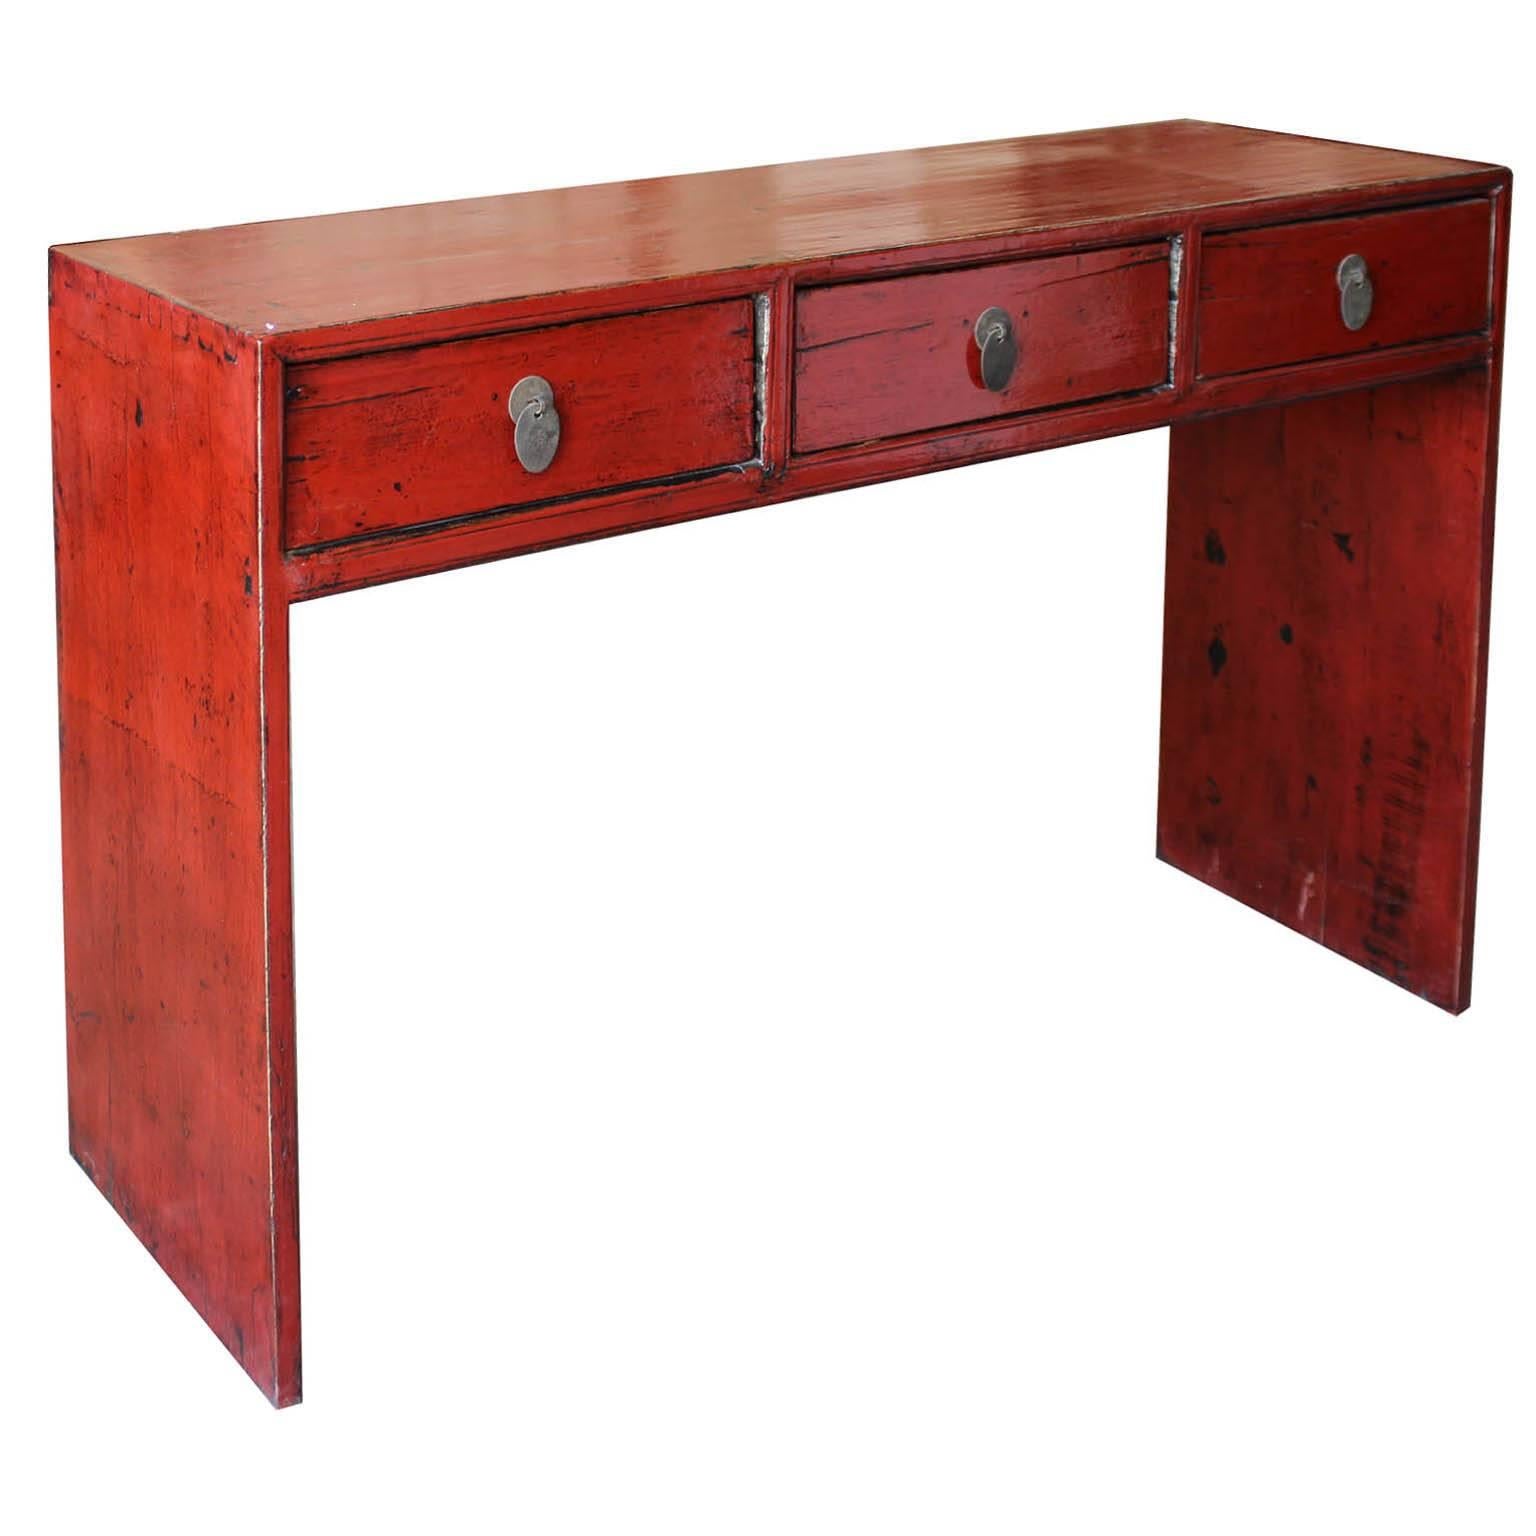 Three-drawer red console table can be used as a desk to bring a pop of color into the bedroom or study. Shanxi, Chine, circa 1920s. New hardware.